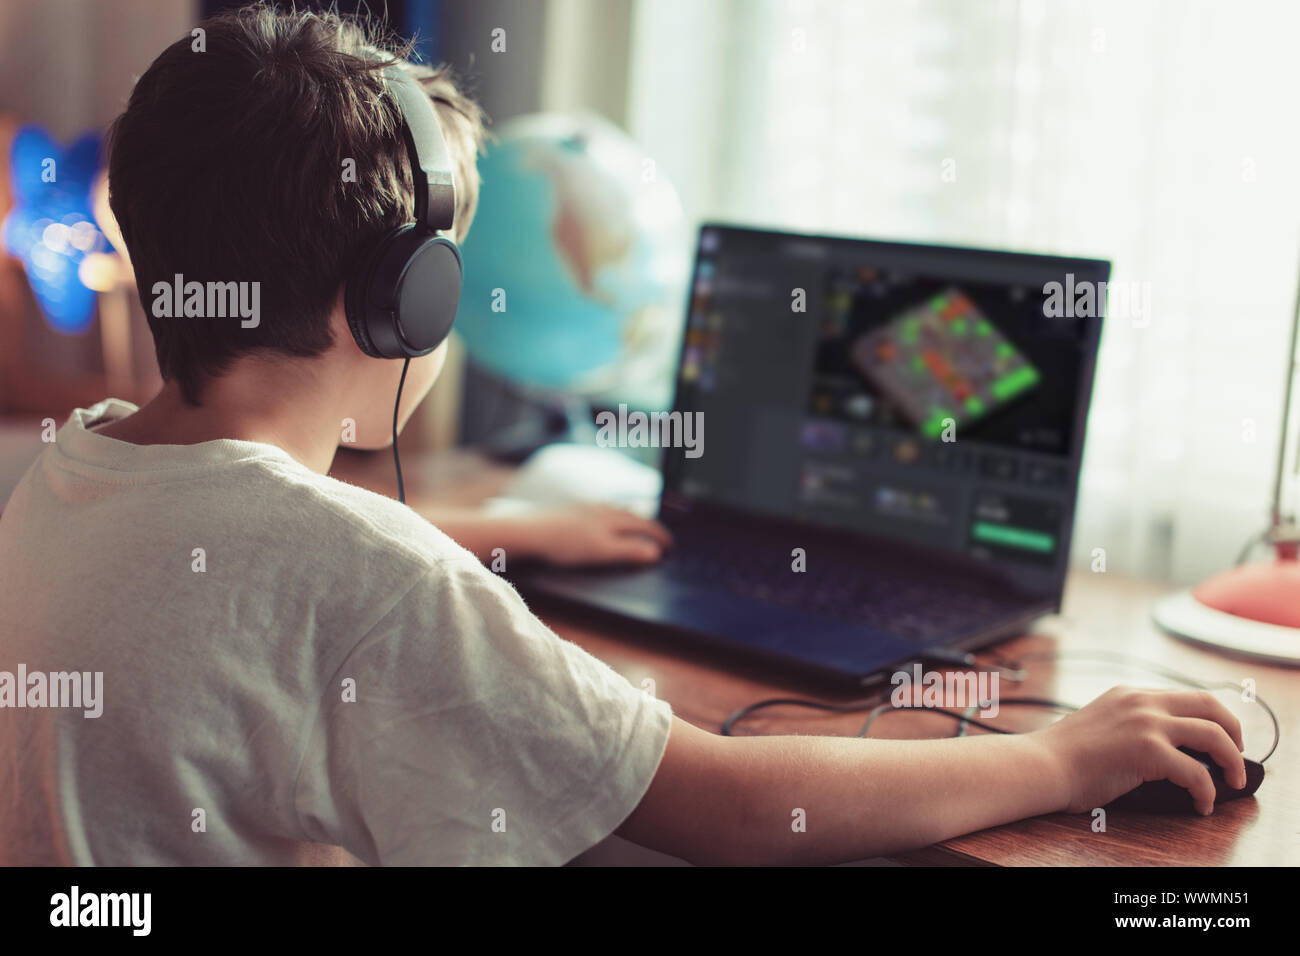 Little dependent gamer boy playing mass multiplayer game on laptop at home Stock Photo